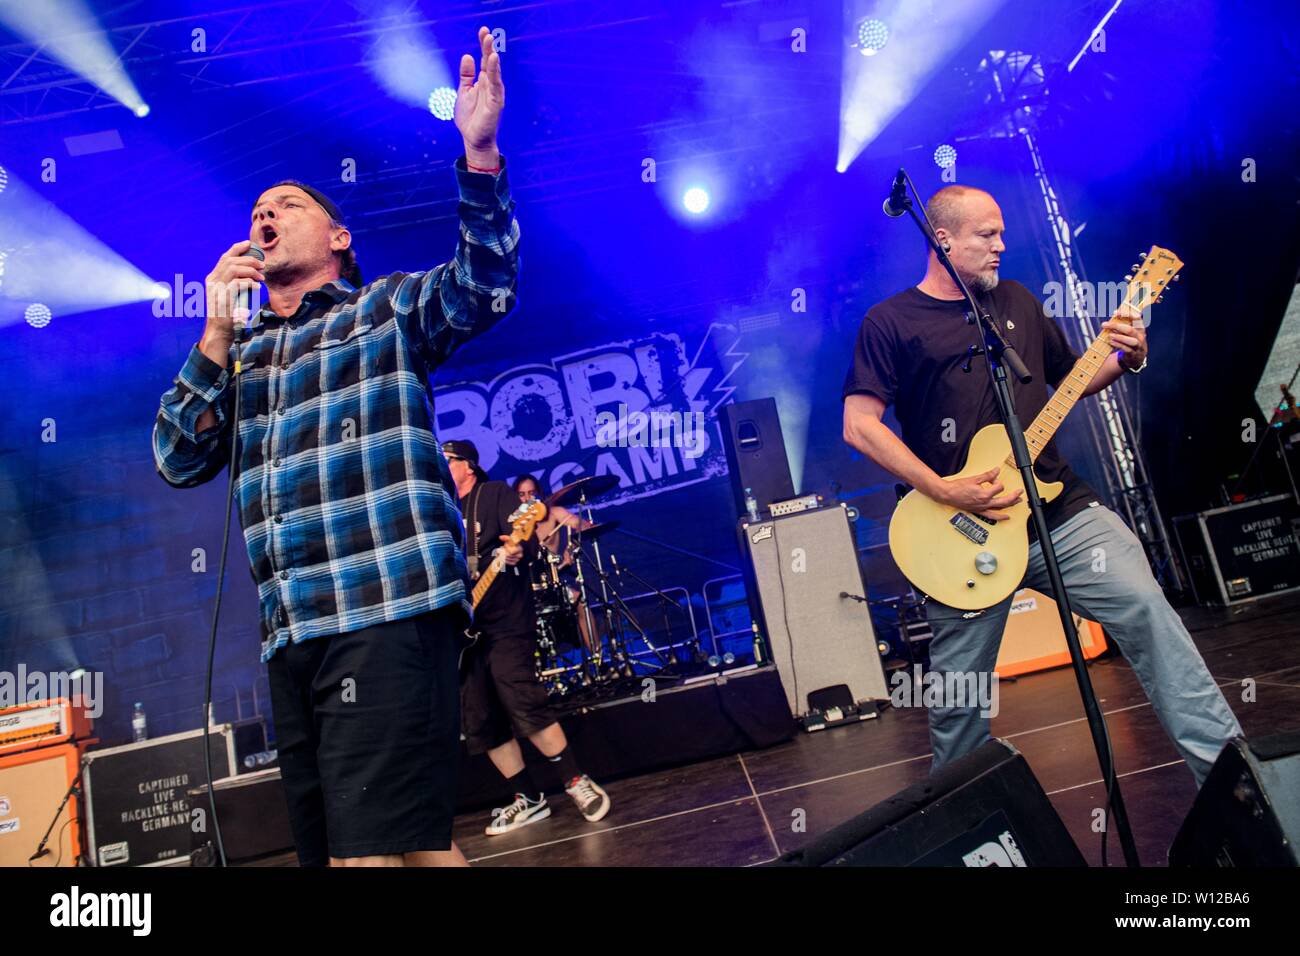 24.06.2019, the American hard-rock band Ugly Kid Joe live at the Kieler  Woche on the stage of the RADIO BOB! ROCKCAMP on the Reventlou meadow.  Sanger and frontman Whitfield Crane in action.